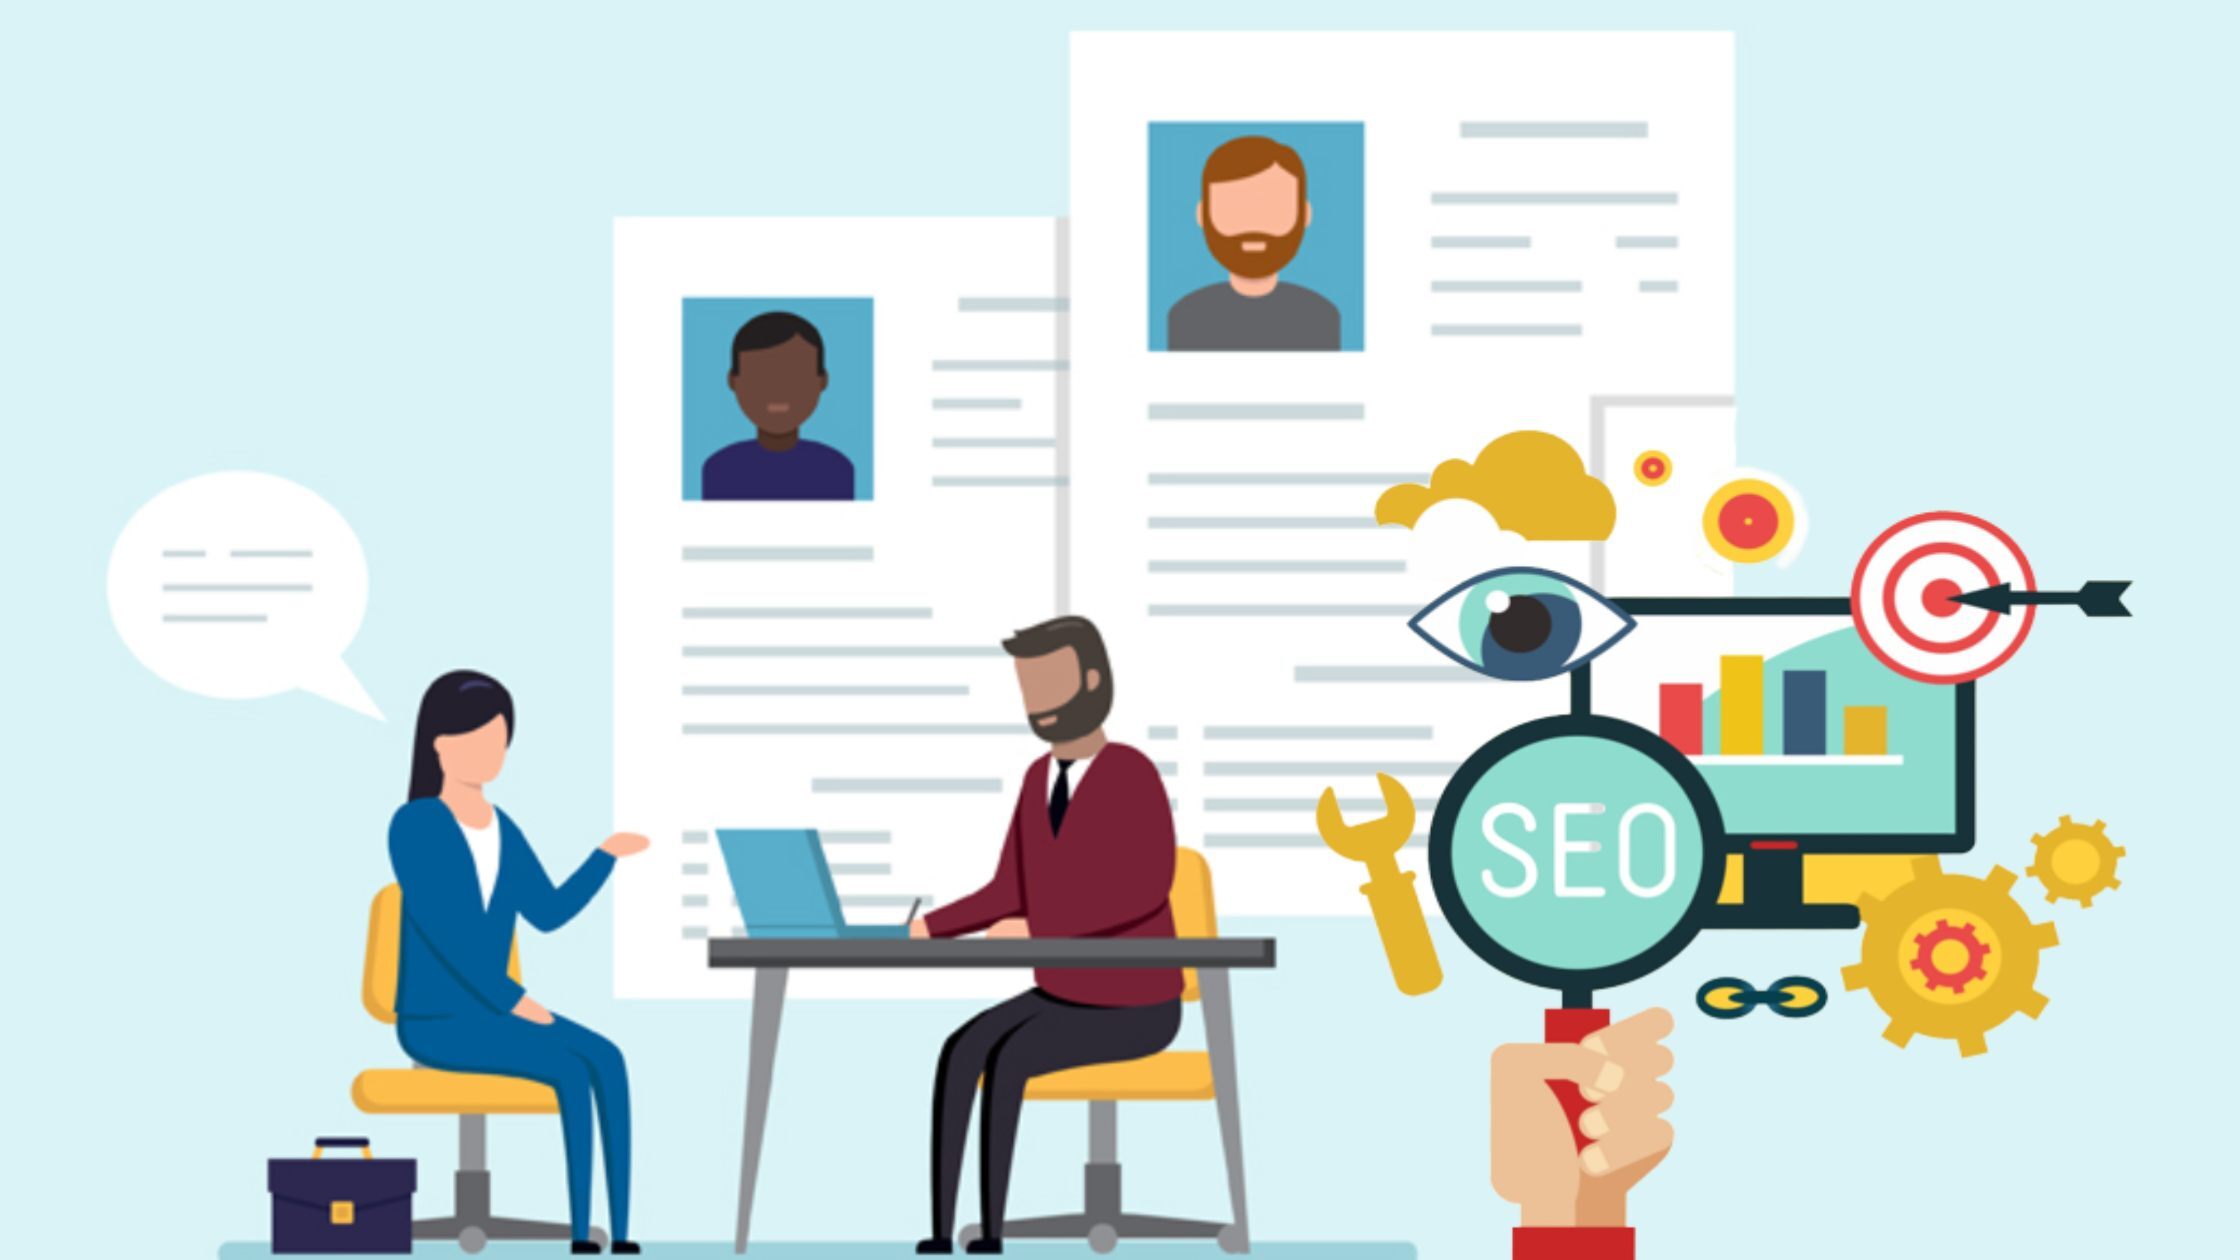 How To Maximize Hiring Efforts With The Knowledge of SEO For Recruiters